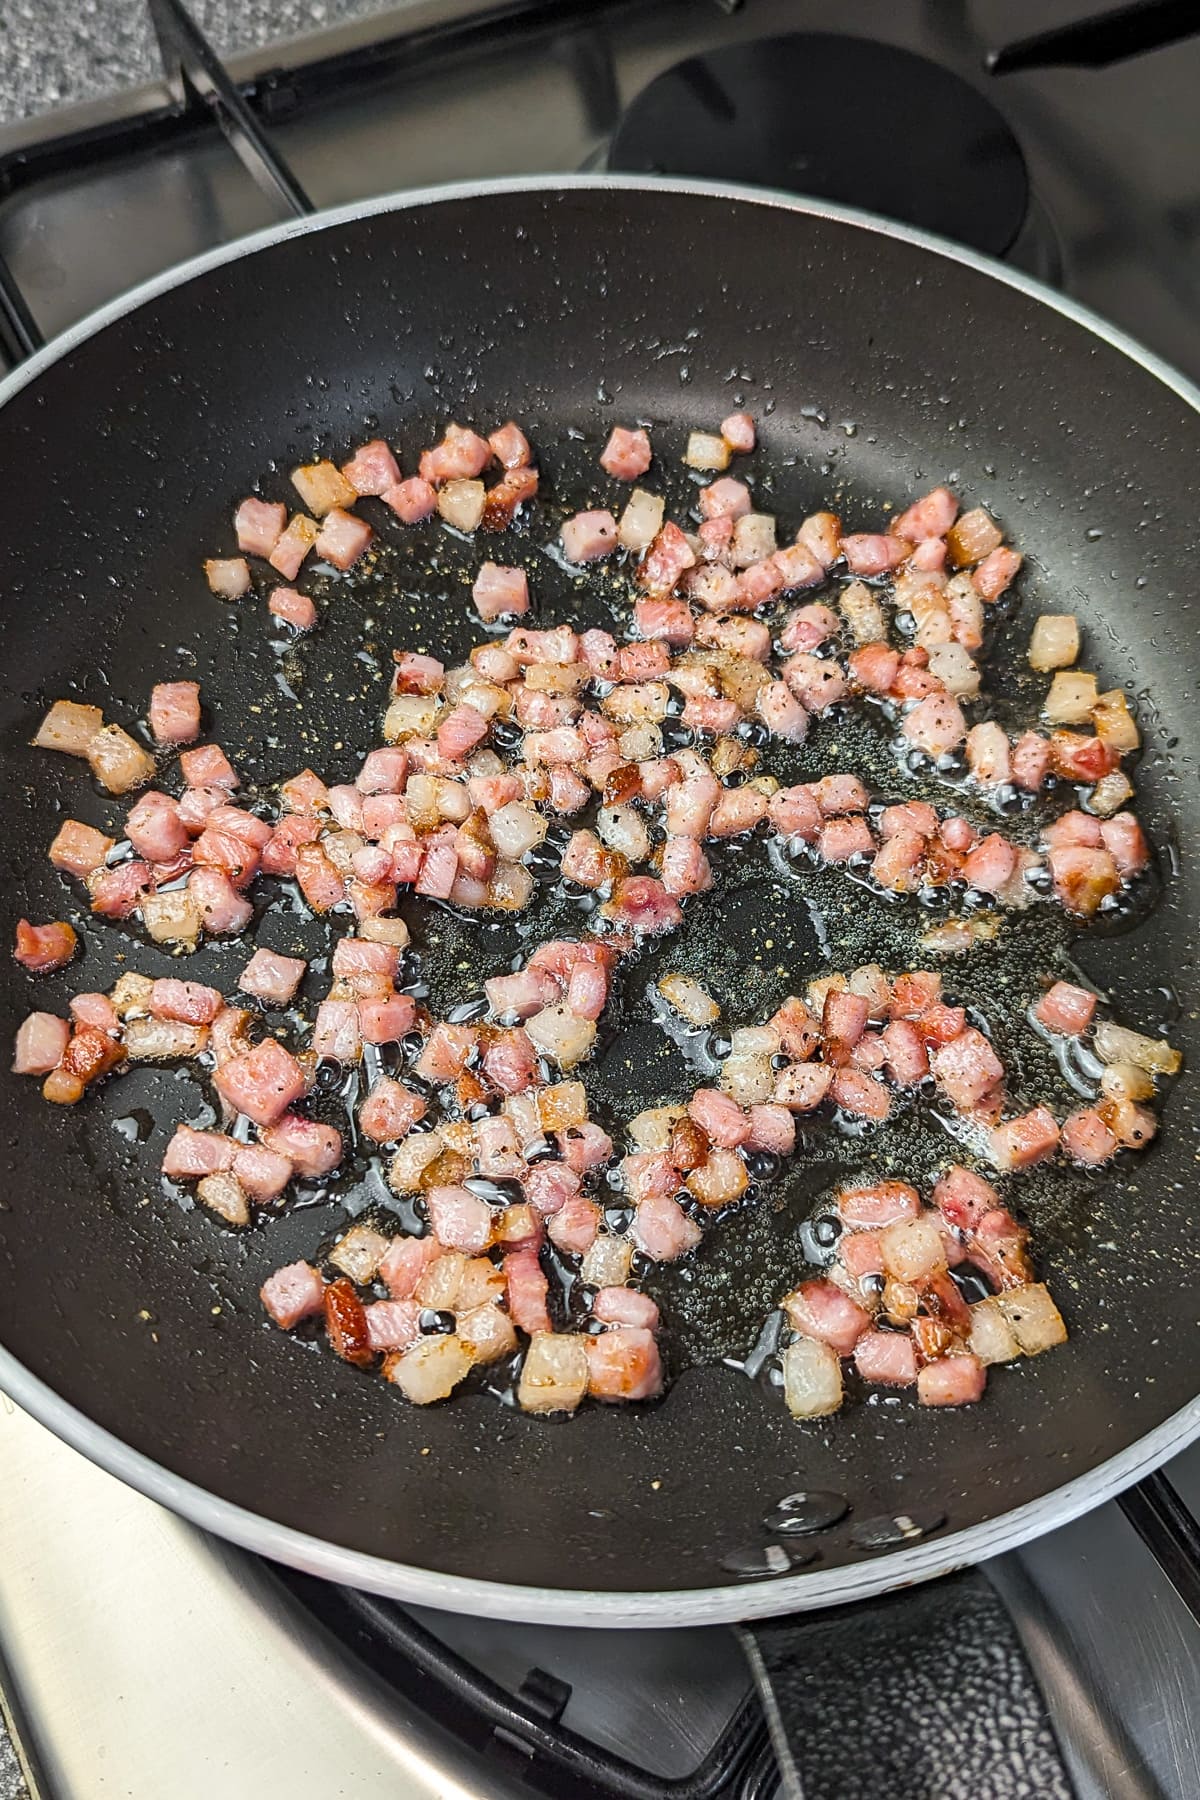 Diced ham sizzling in a black frying pan over a stove.